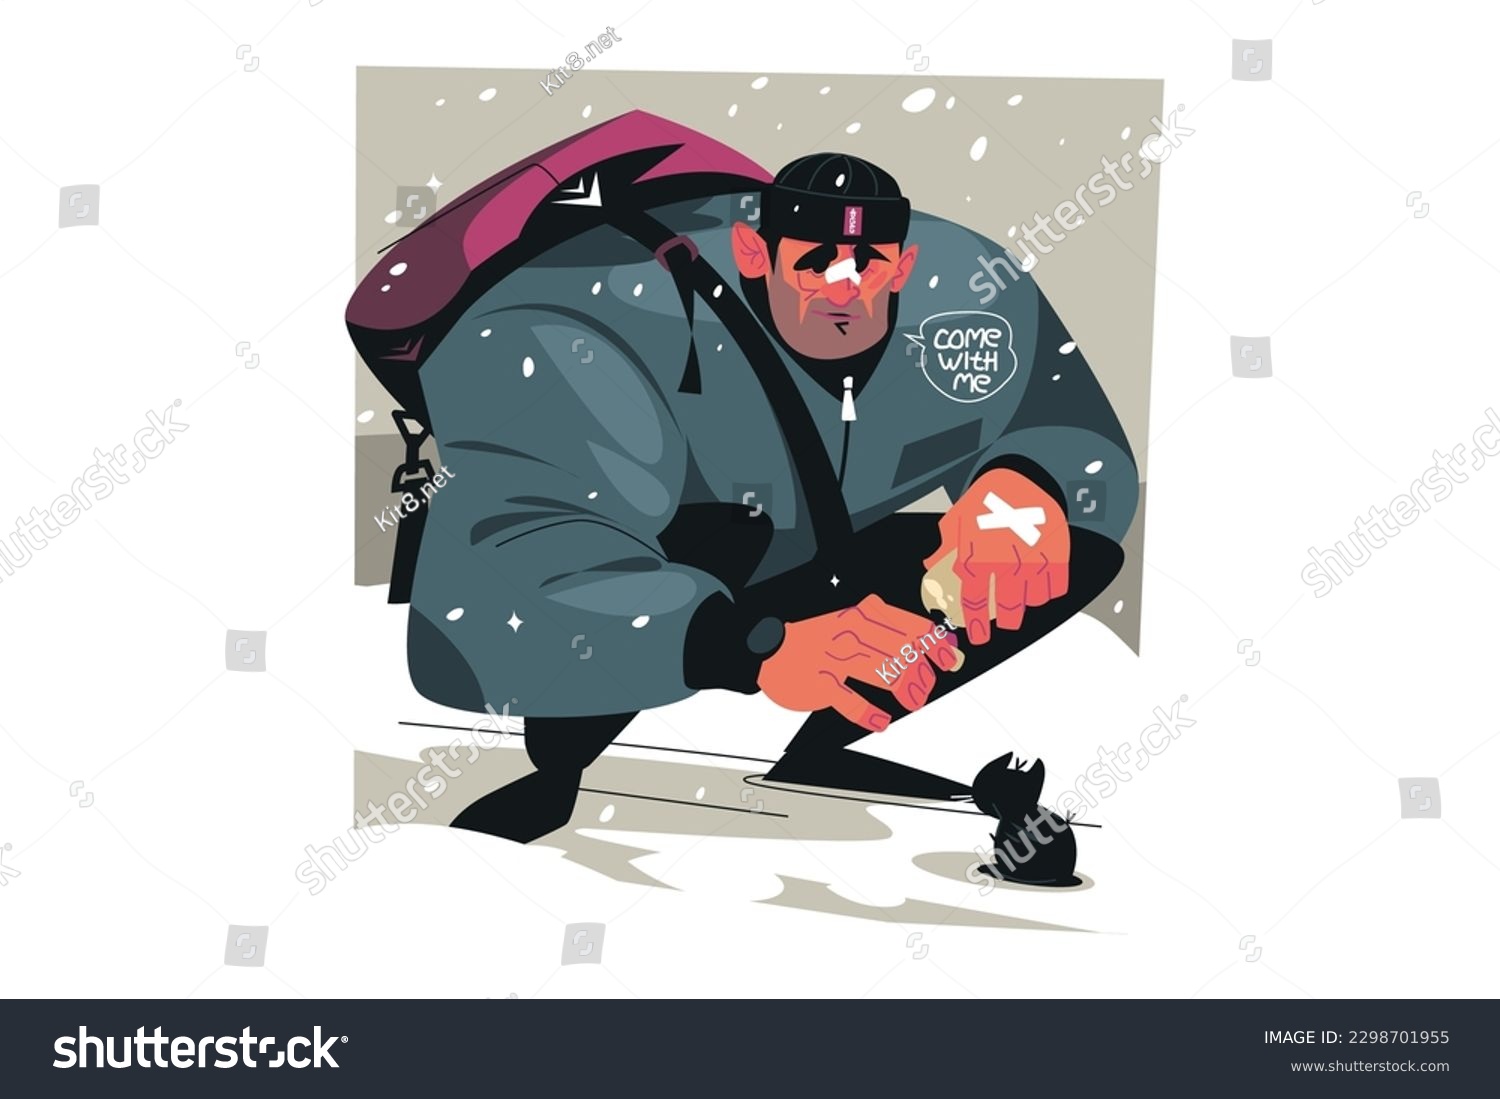 SVG of Big man feeds kitten frozen in cold, vector illustration. Caring the needy, helping homeless animals concept. svg